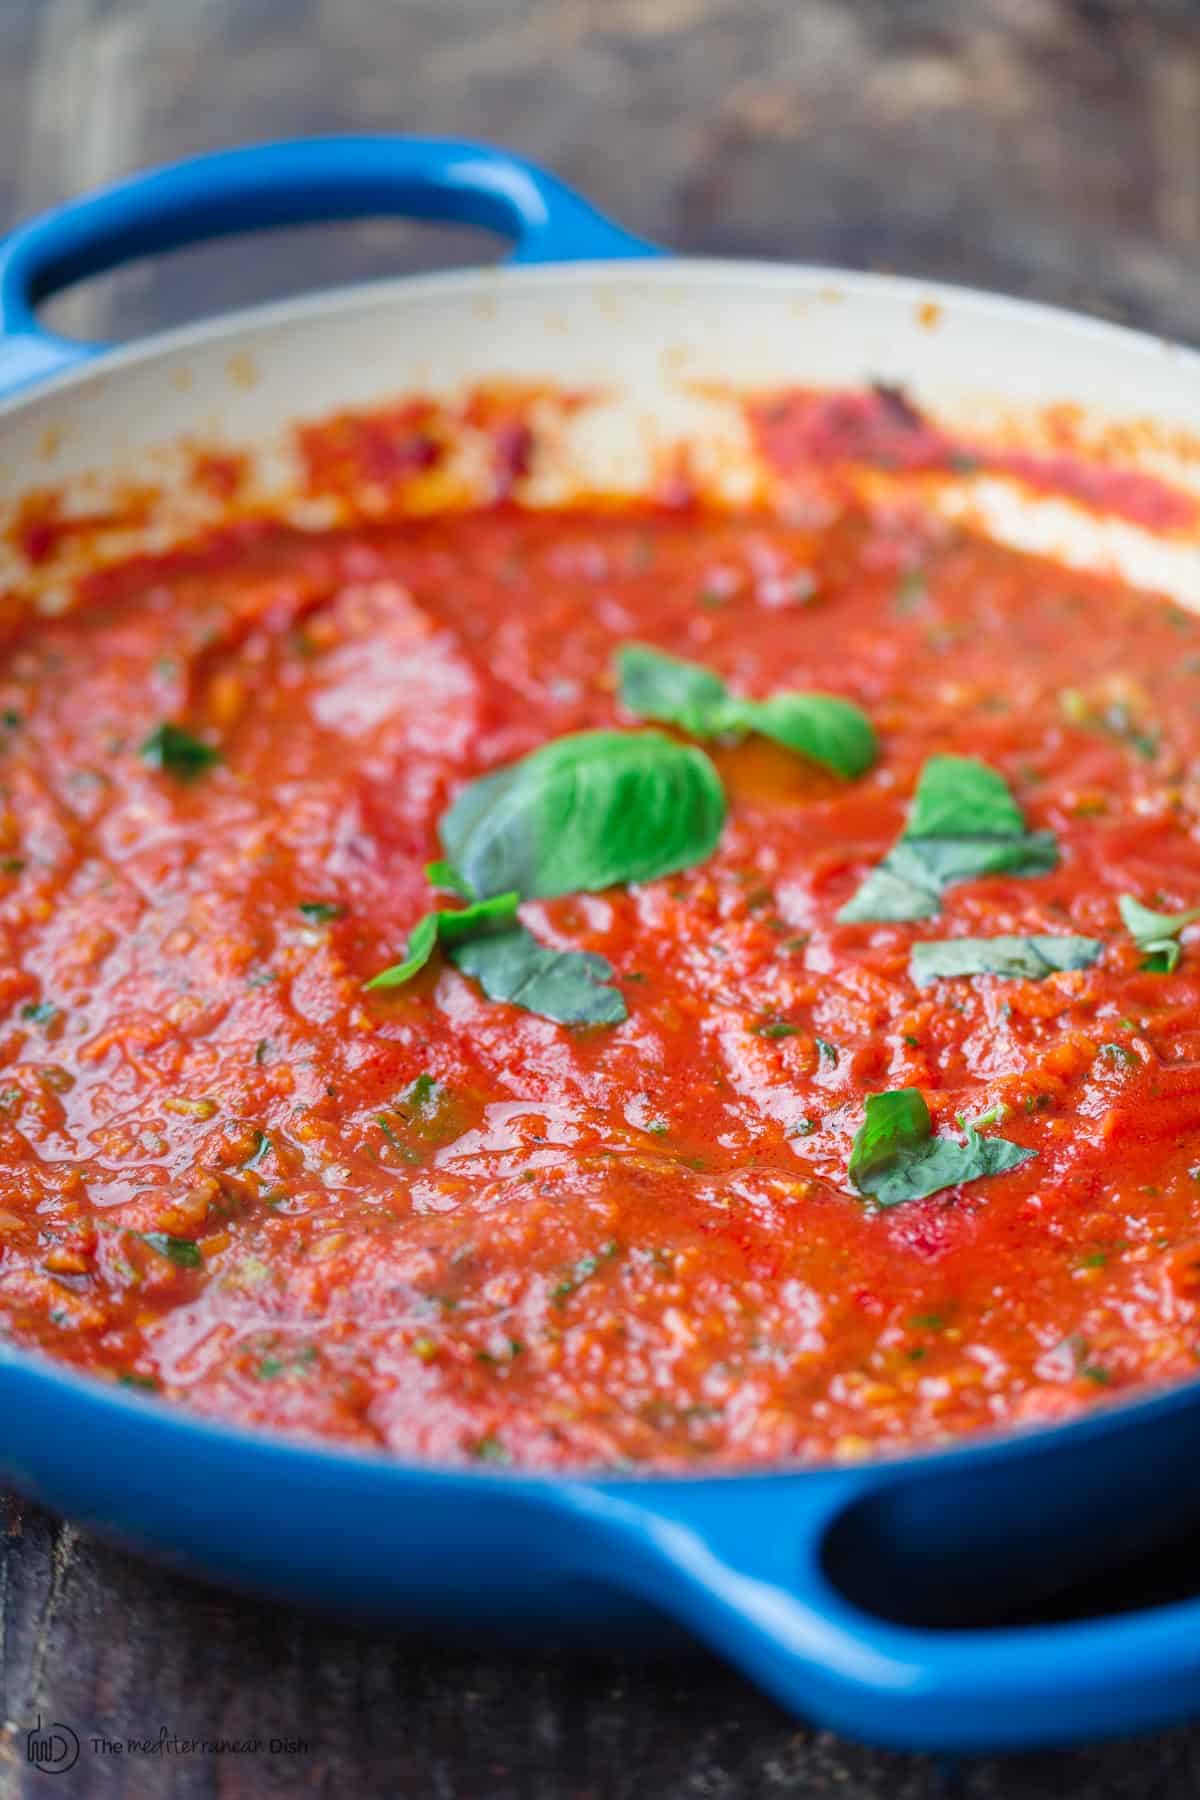 Homemade spaghetti sauce topped with basil